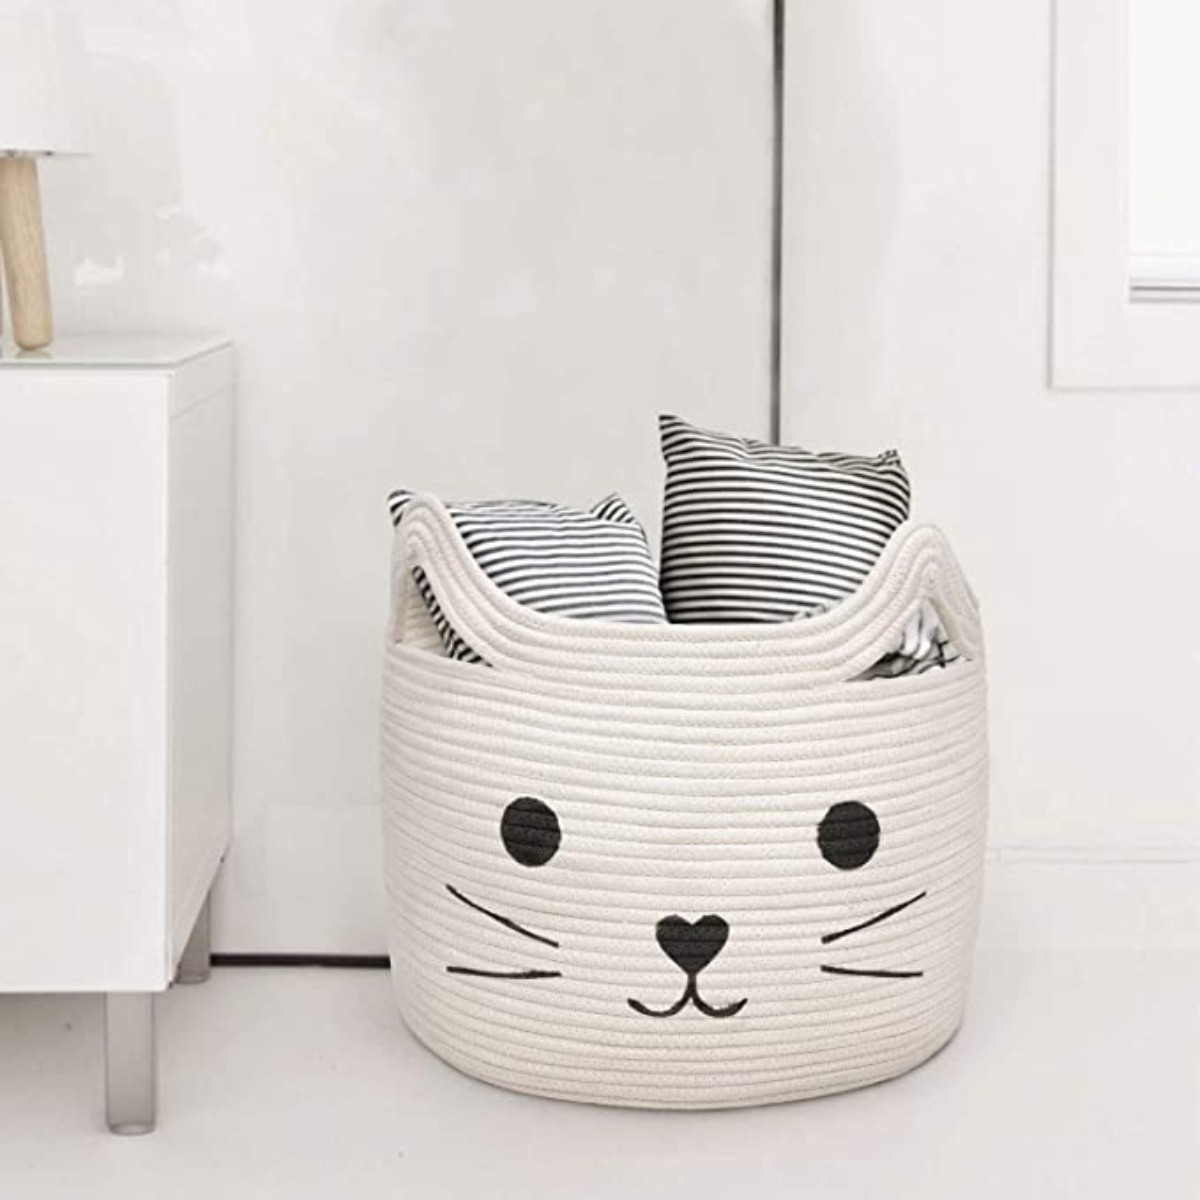 Cute And Functional Items For Your Home That Will Make You Squeal With Delight